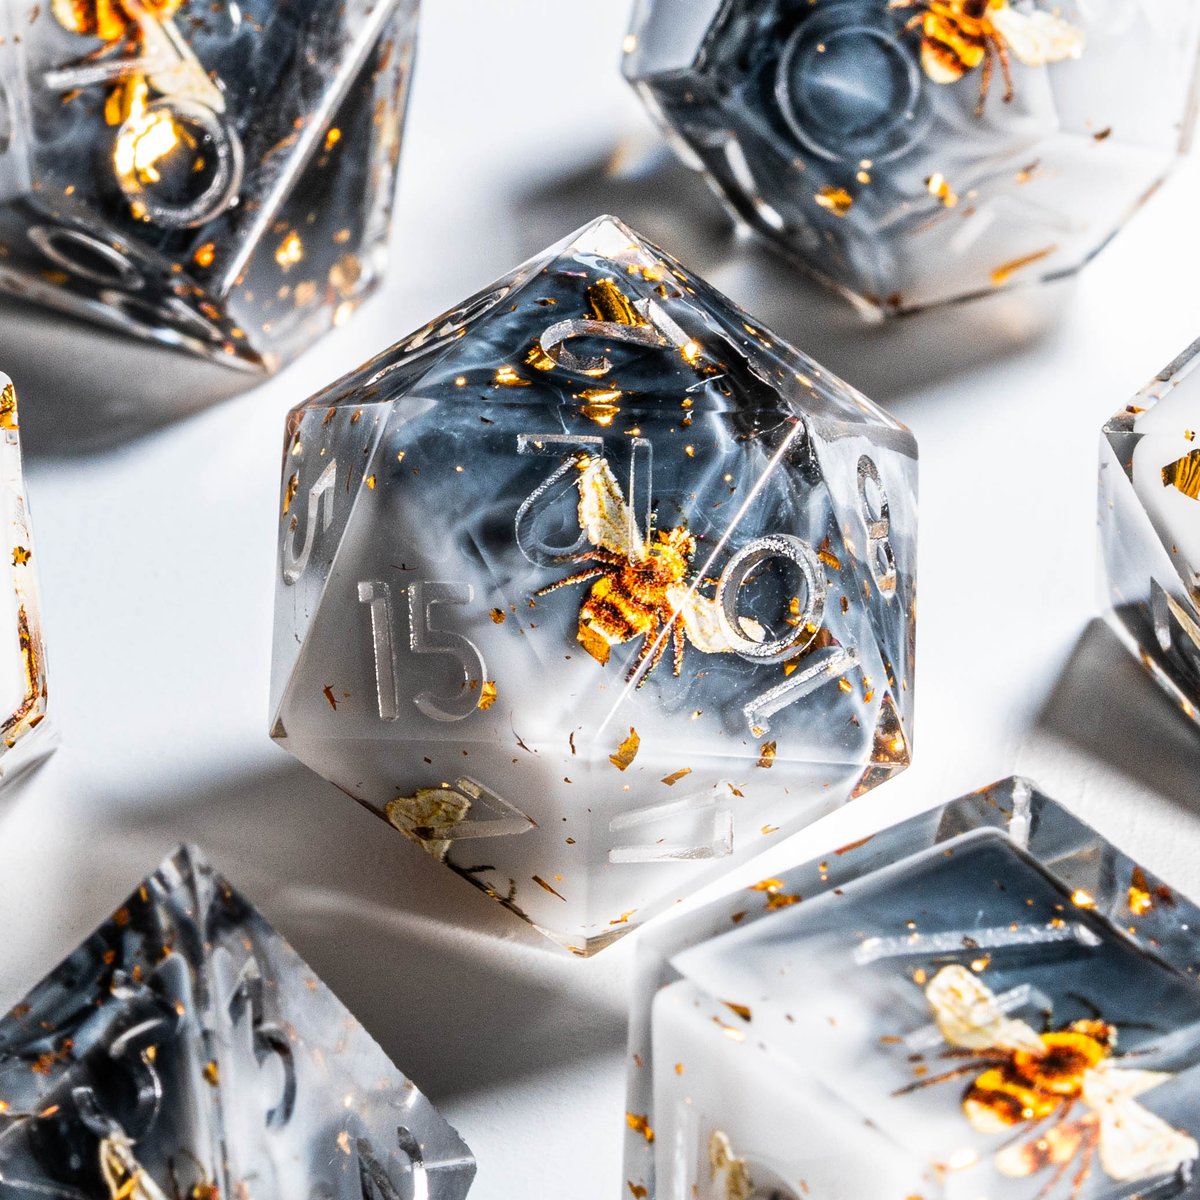 Hello everyone! 🎲 We've crafted a set of dice inspired by Chinese ink painting, featuring busy bees symbolizing diligence. These dice combine deep, tranquil hues with golden flecks that reflect the sun's rays, creating a dynamic yet serene style. 🐝✨ We're excited to hear your…